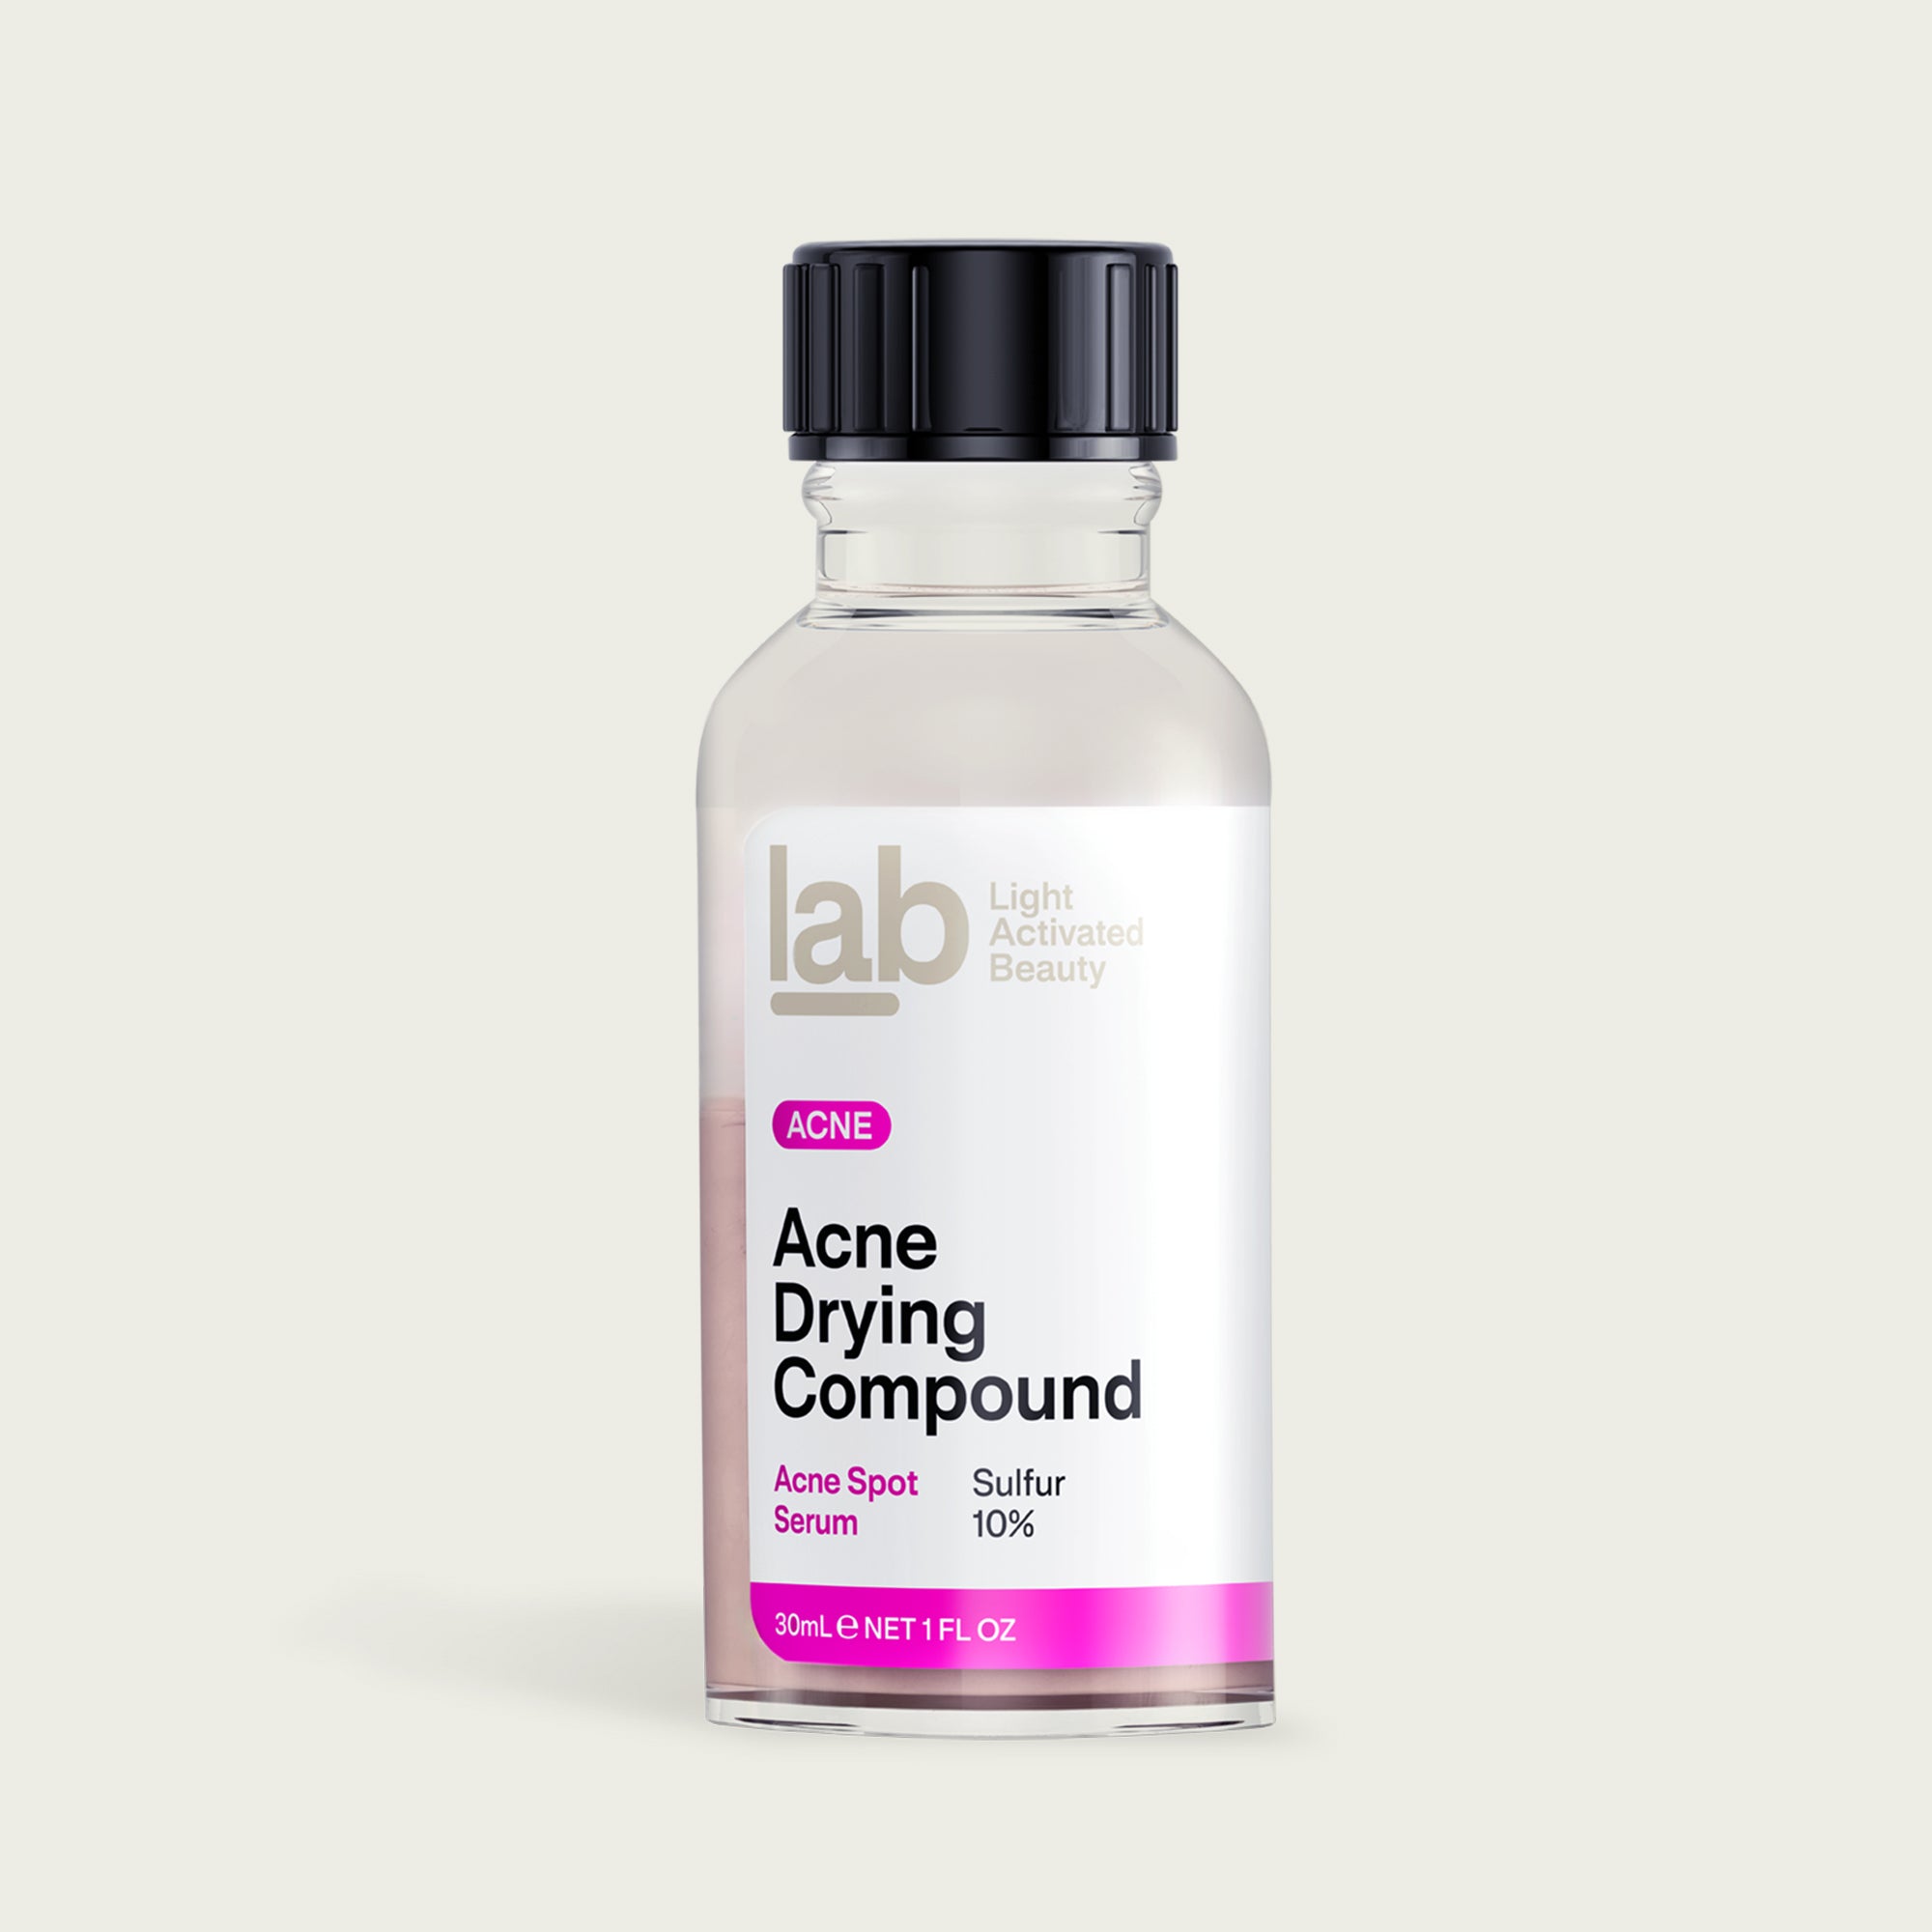 Acne Drying Compound